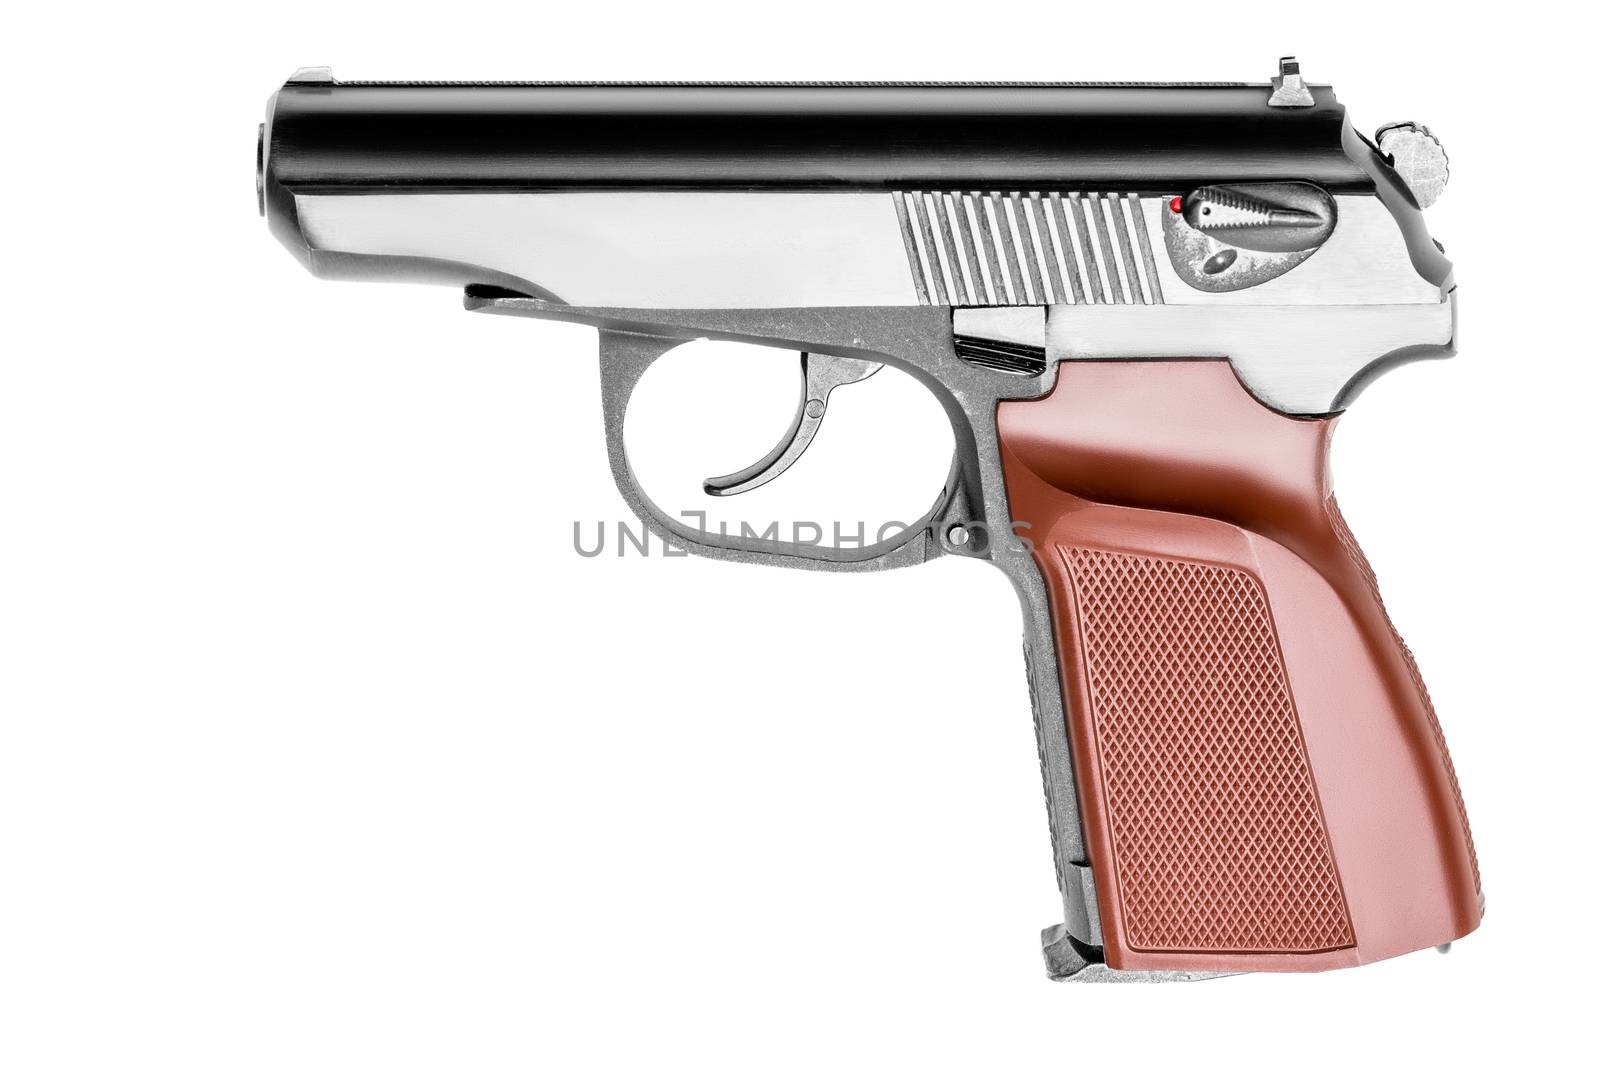 fire pistol close up on white background